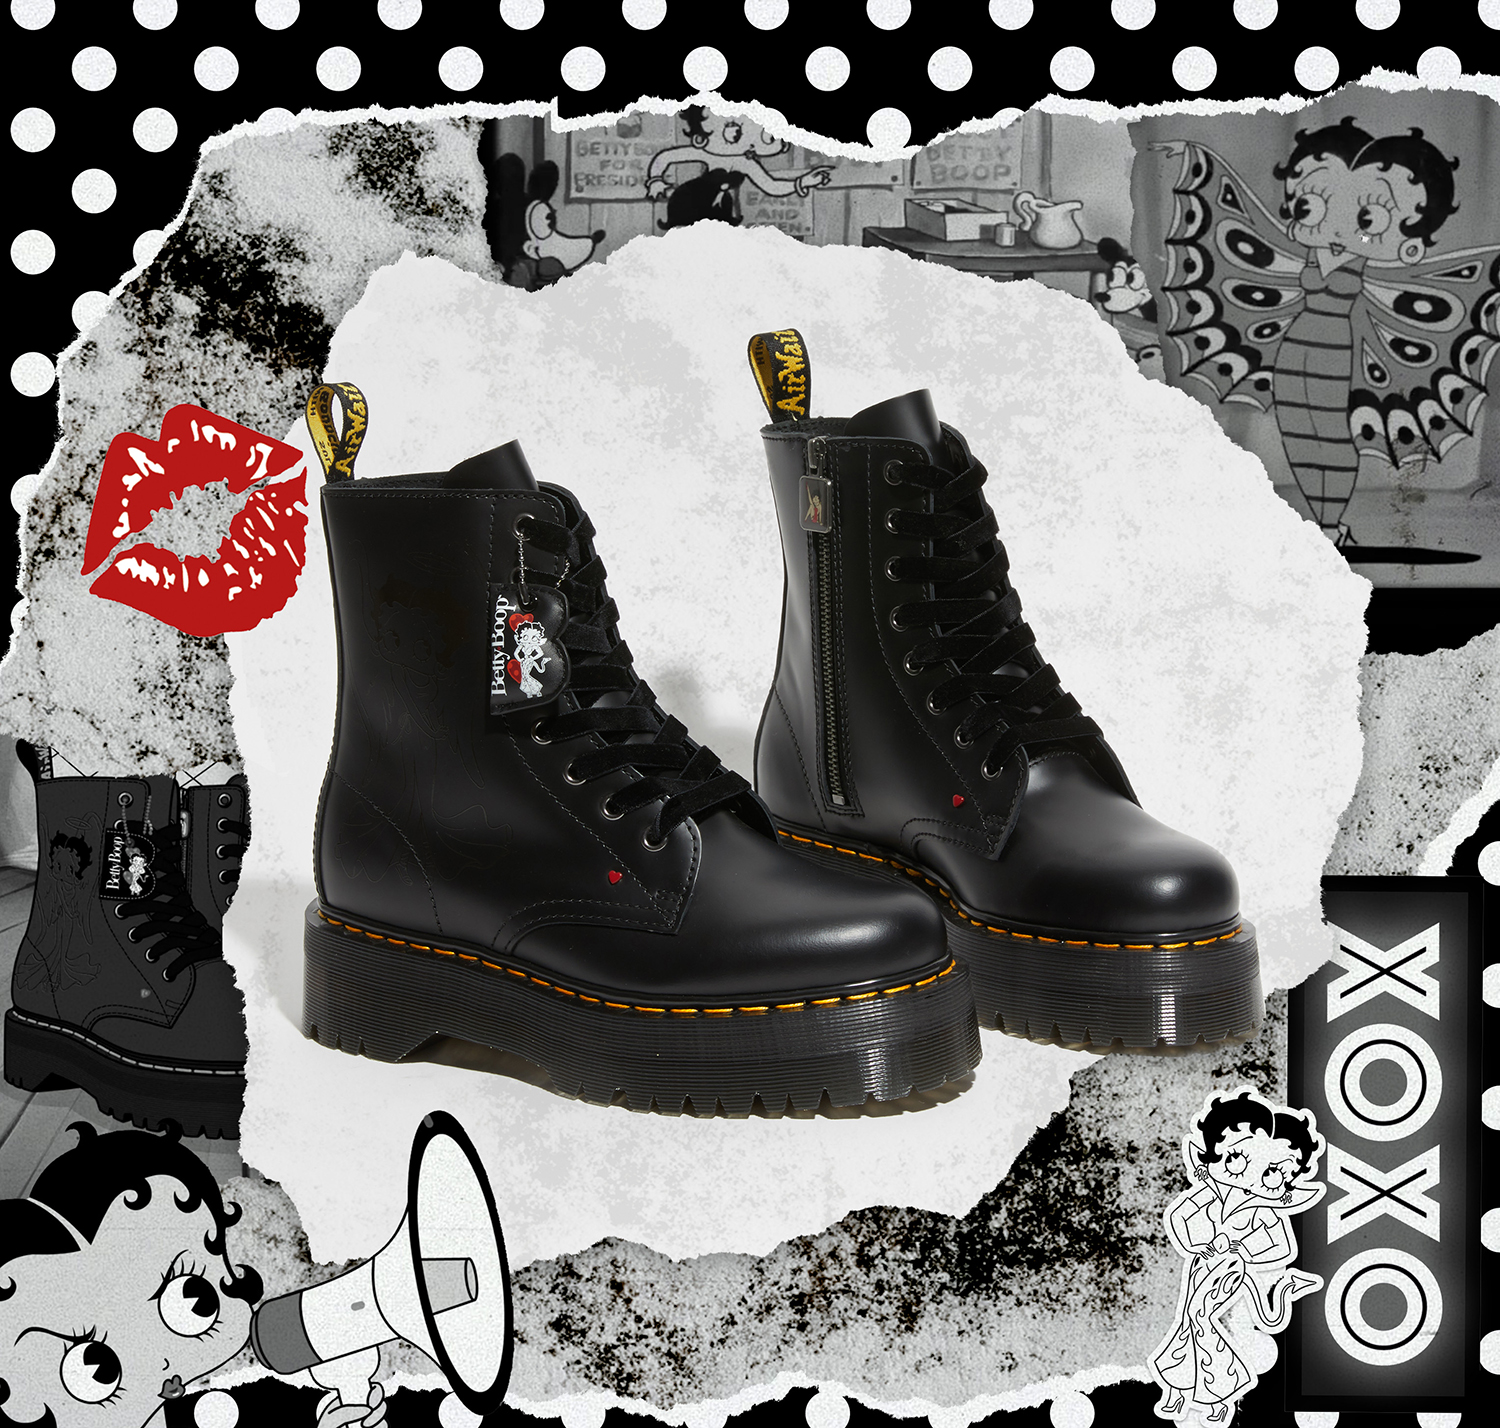 DR. MARTENS X BETTY BOOPコラボ誕生！厚底ブーツからサンダル、バッグ ...